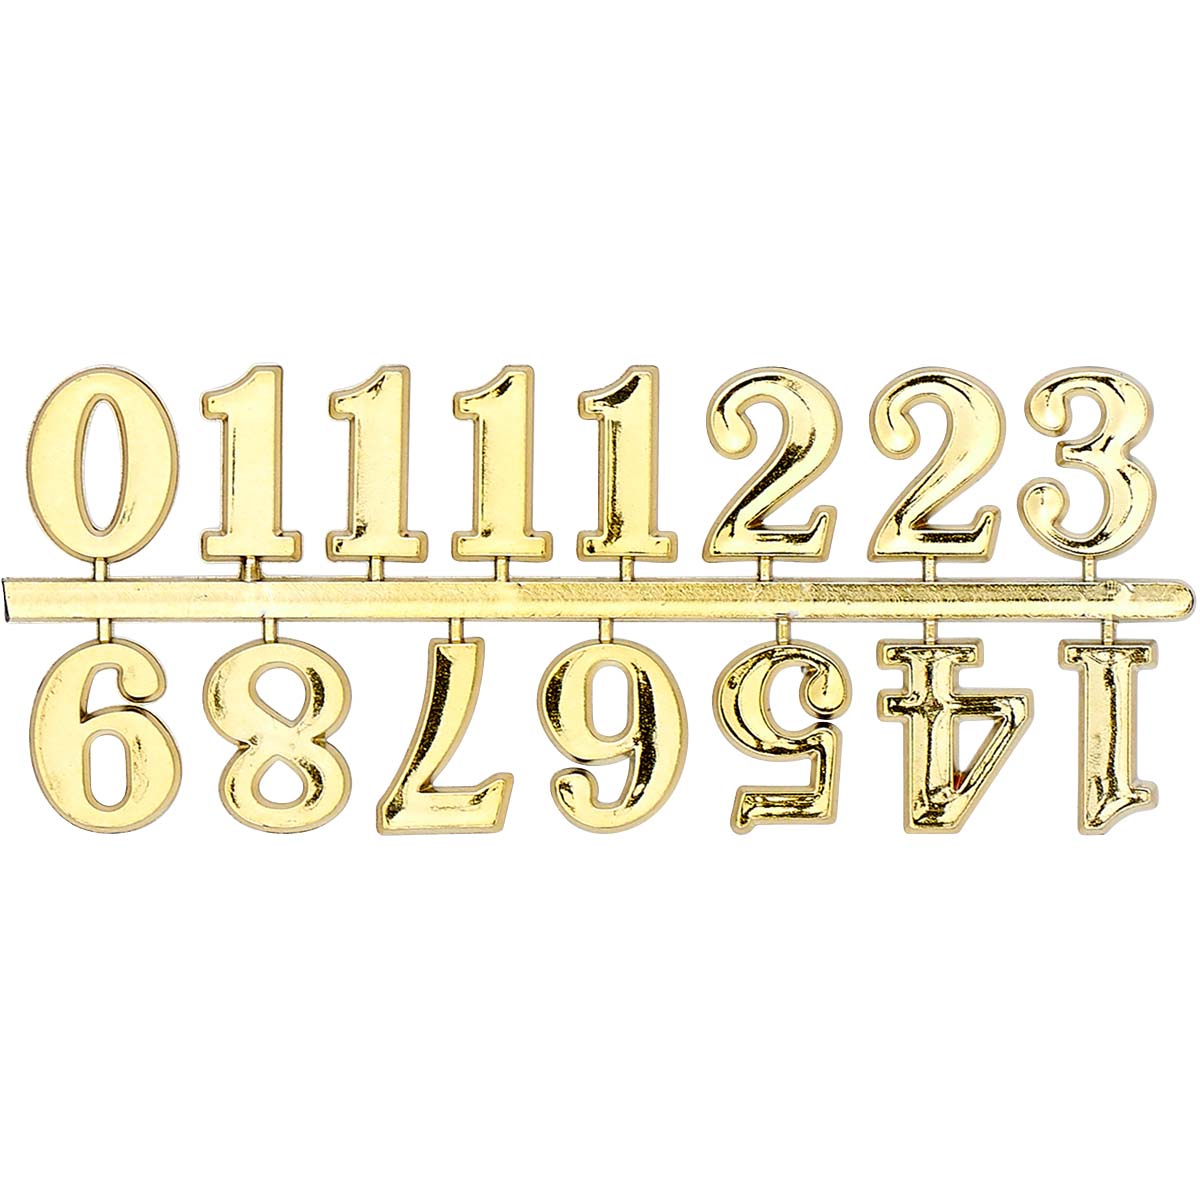 Plaid ® Accessories - Clock Numbers - Gold, 1